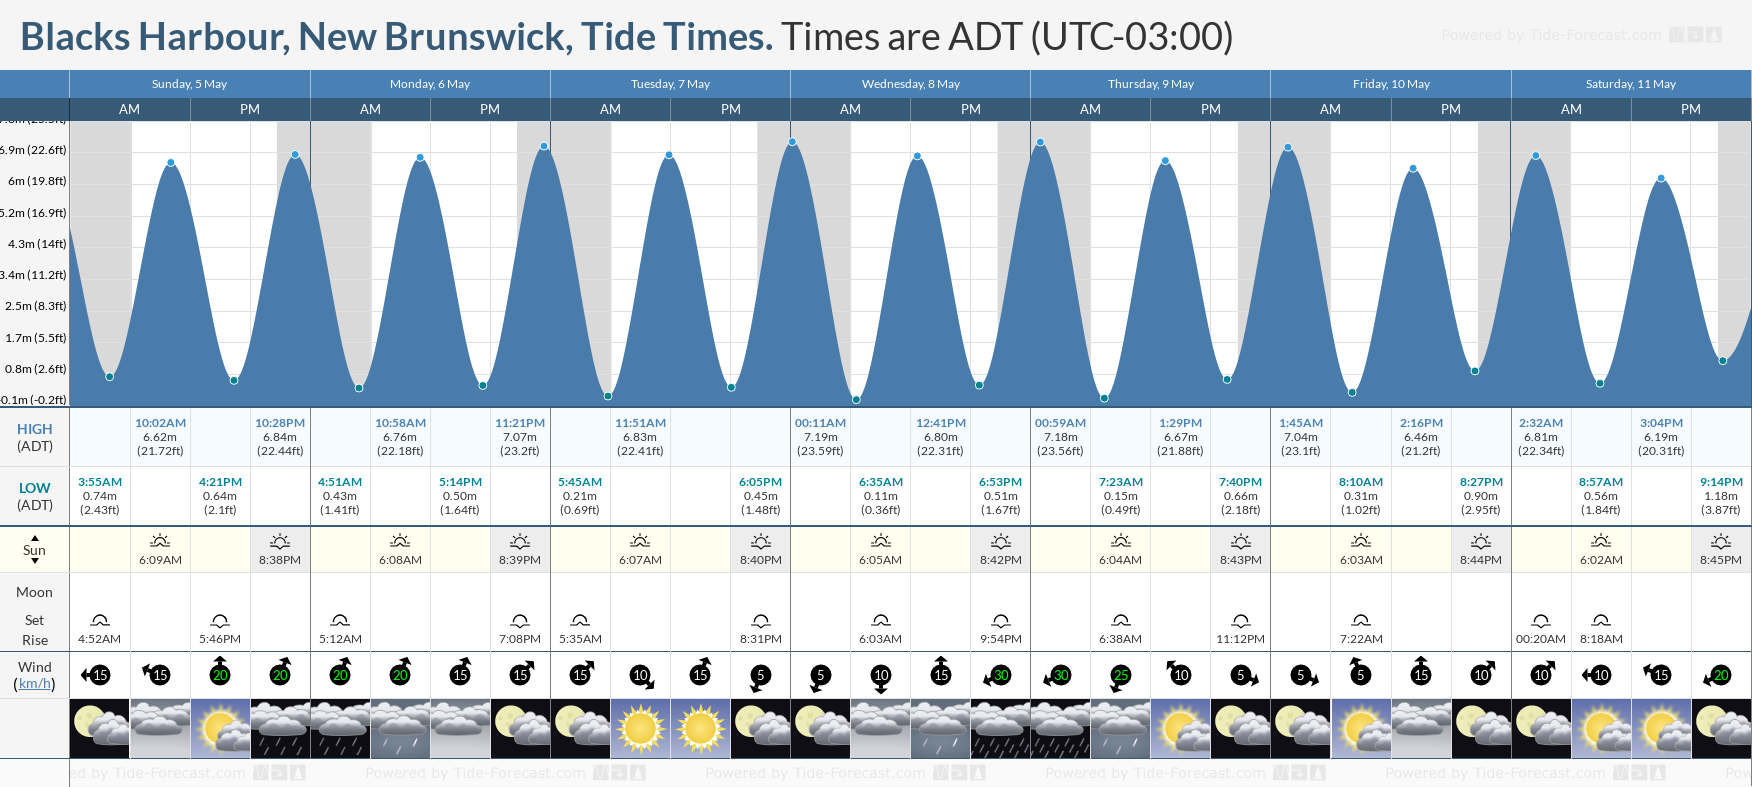 Blacks Harbour, New Brunswick Tide Chart including high and low tide tide times for the next 7 days